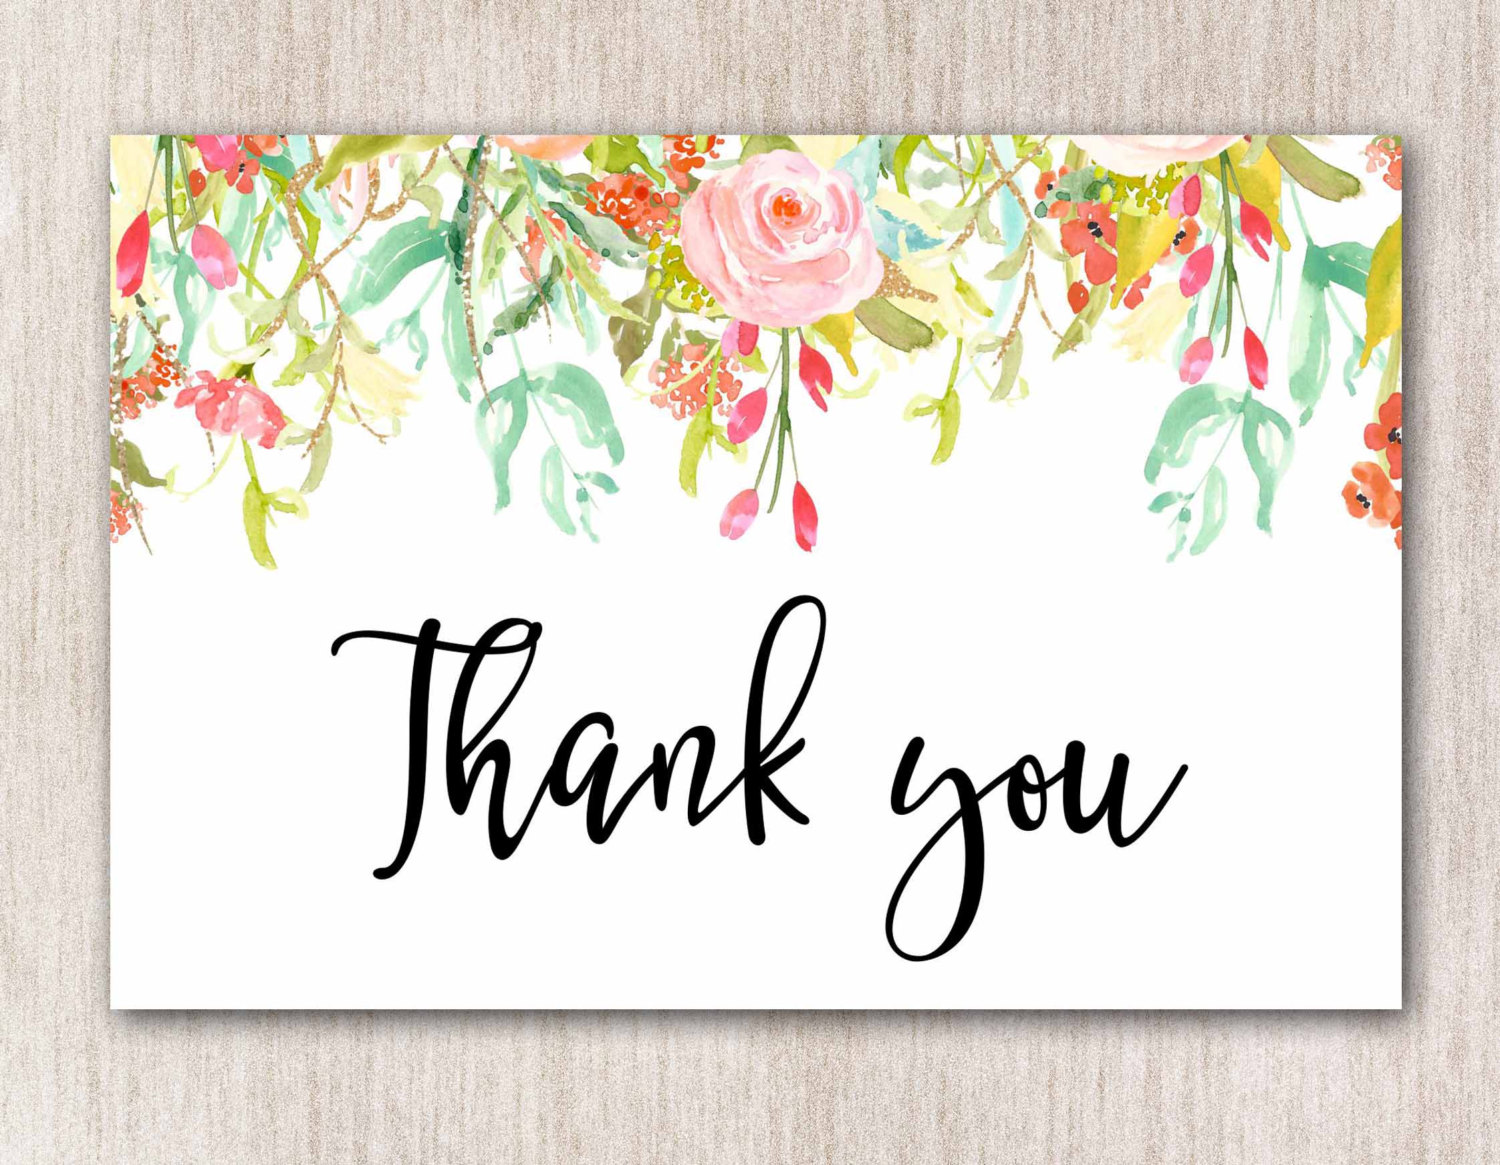 10 Blank Thank You Cards Design Trends Premium PSD Vector Downloads